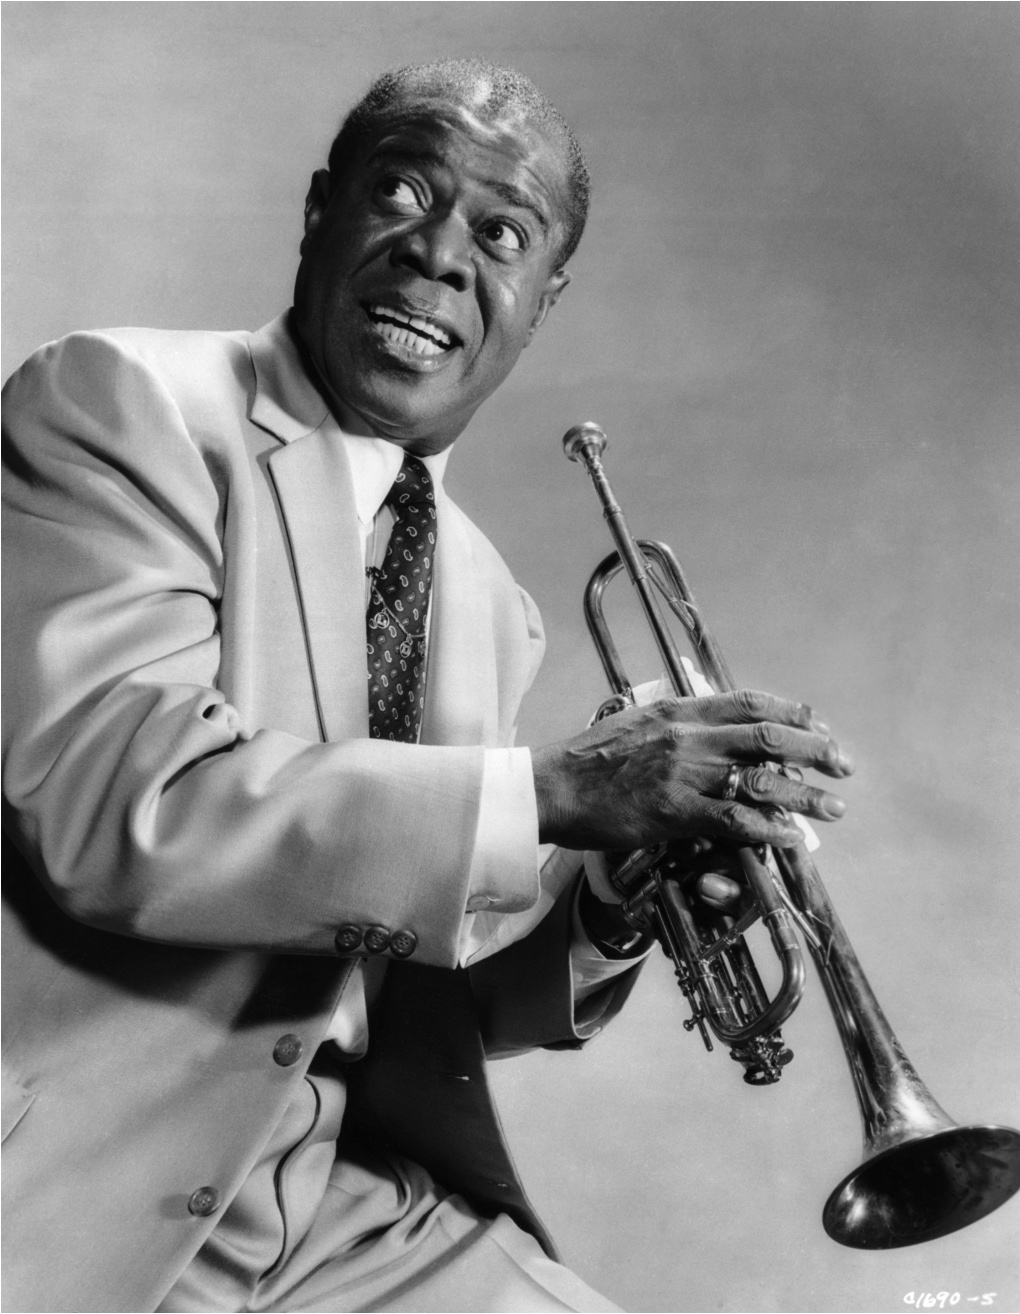 Midweek Music Break: Louis Armstrong, “There’s a Boat Dat’s Leavin’ Soon for New York”